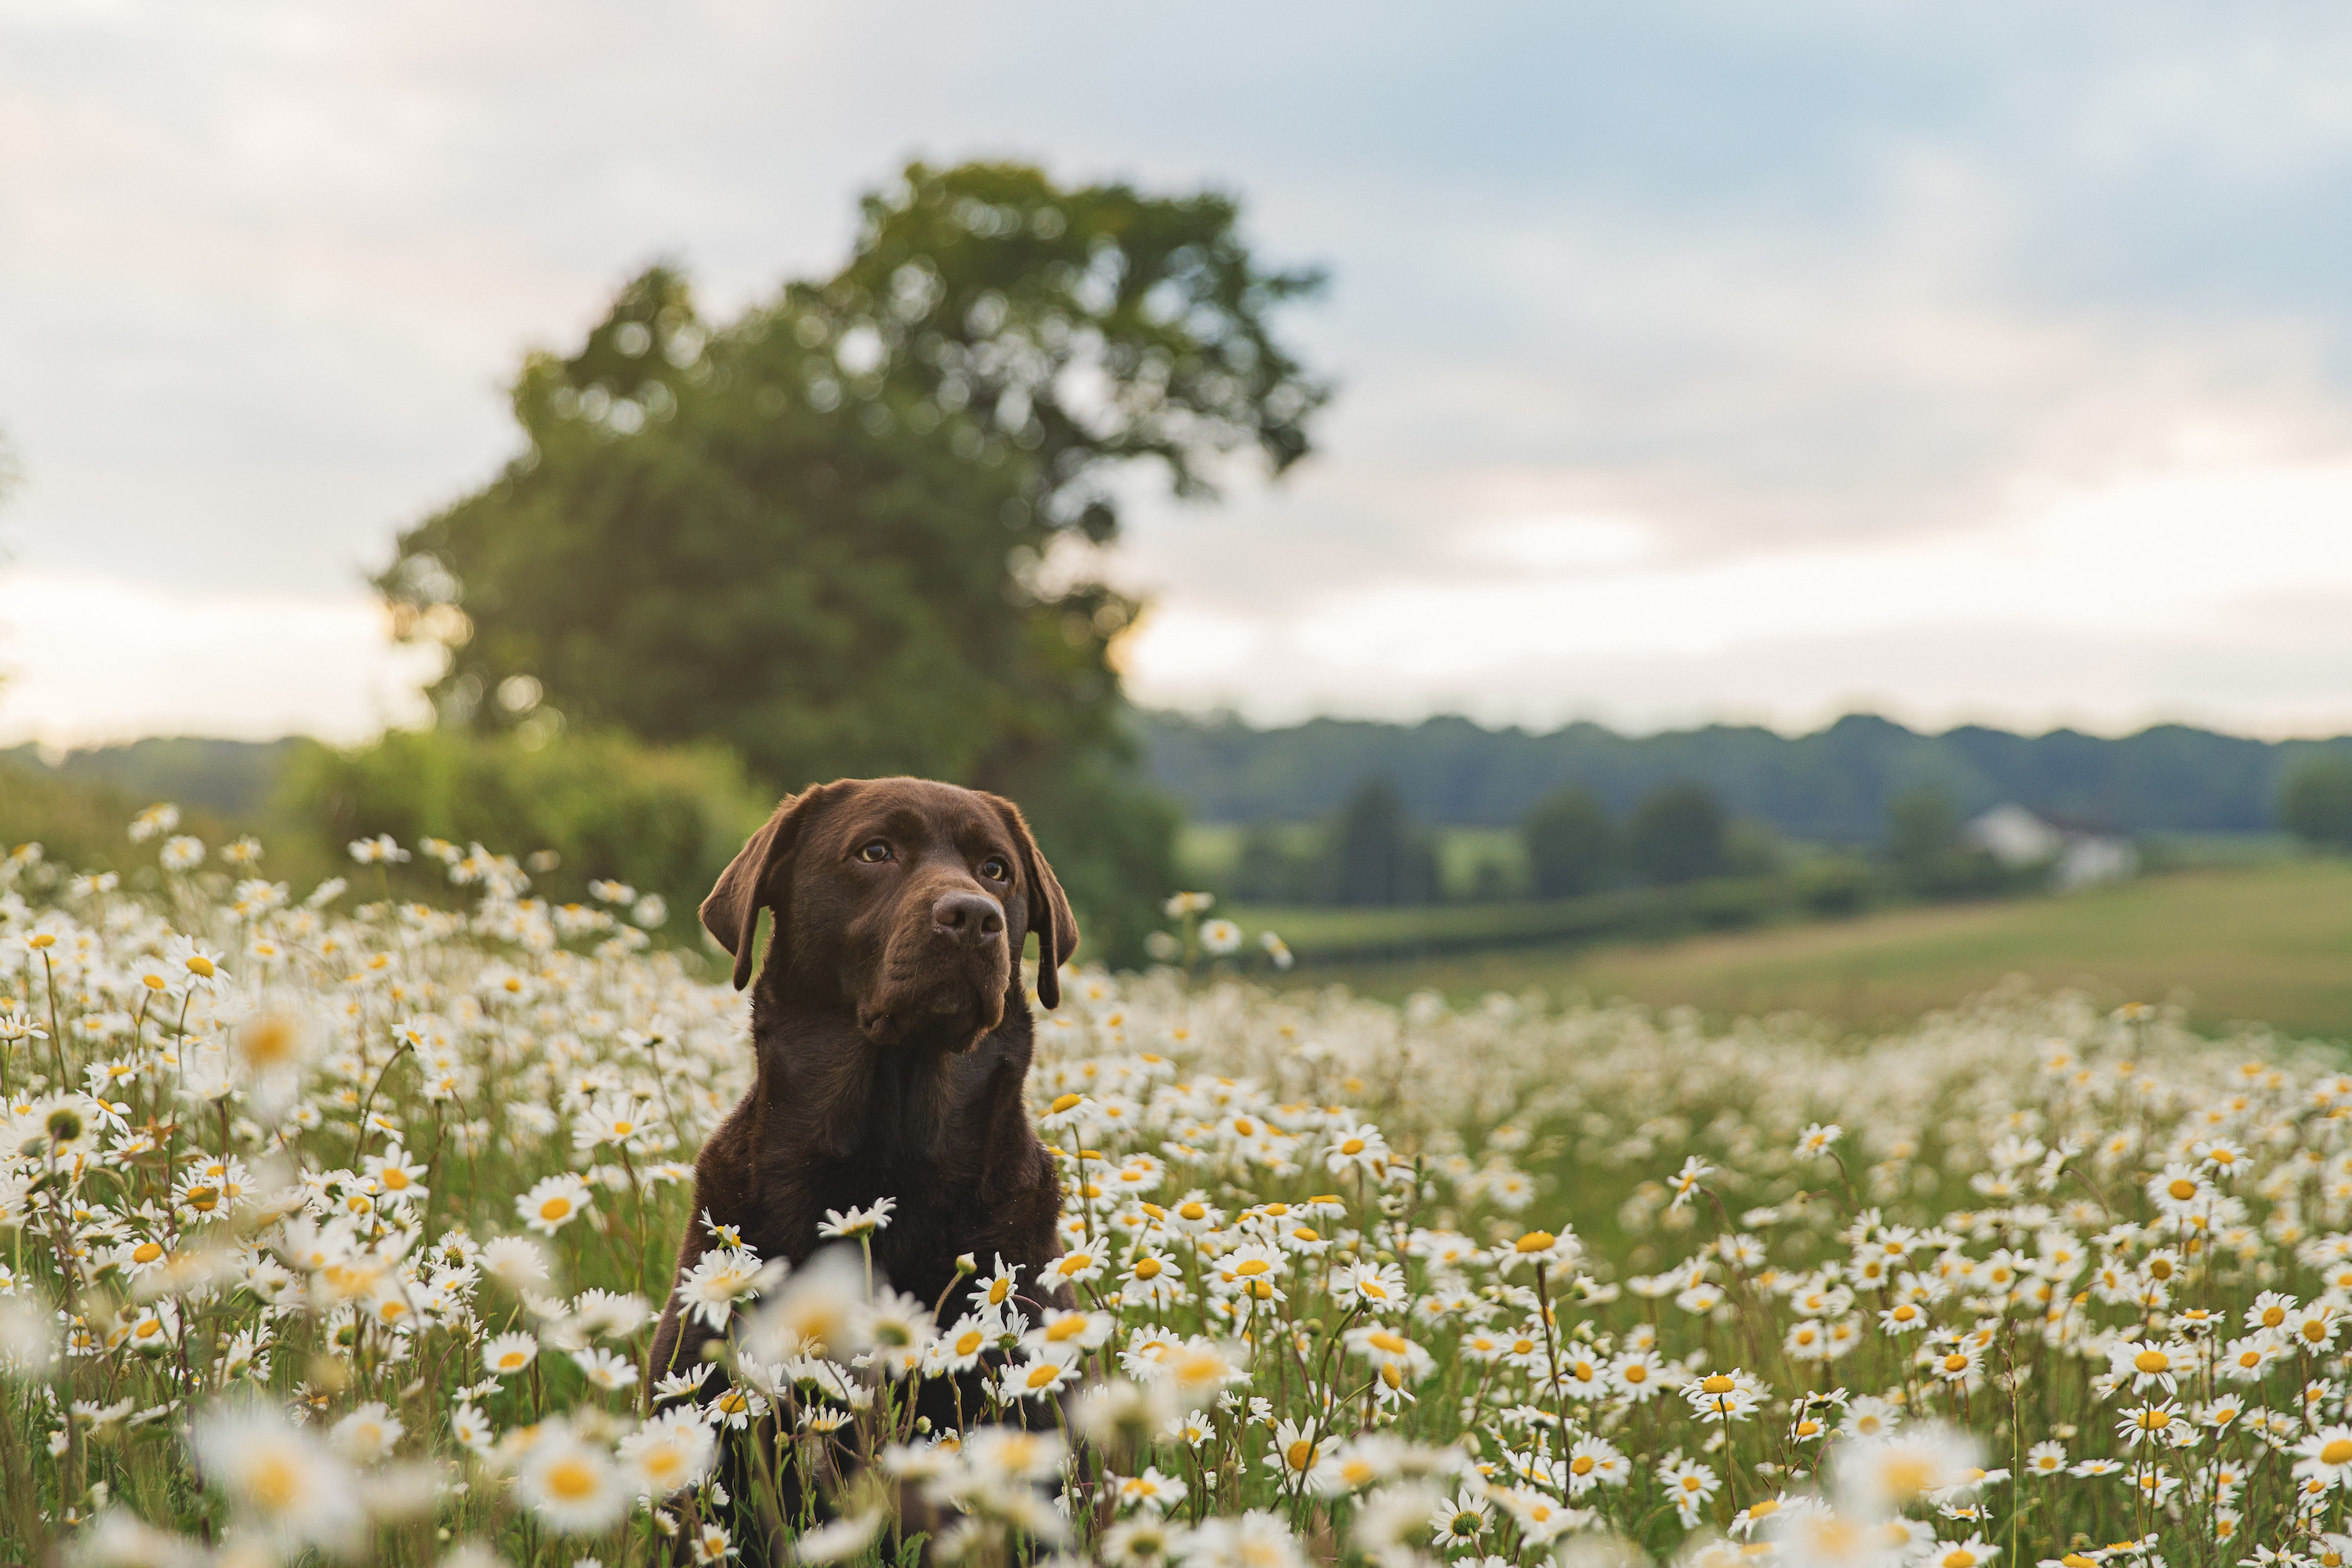 A chocolate lab in a field of flowers, open field and tree behind it